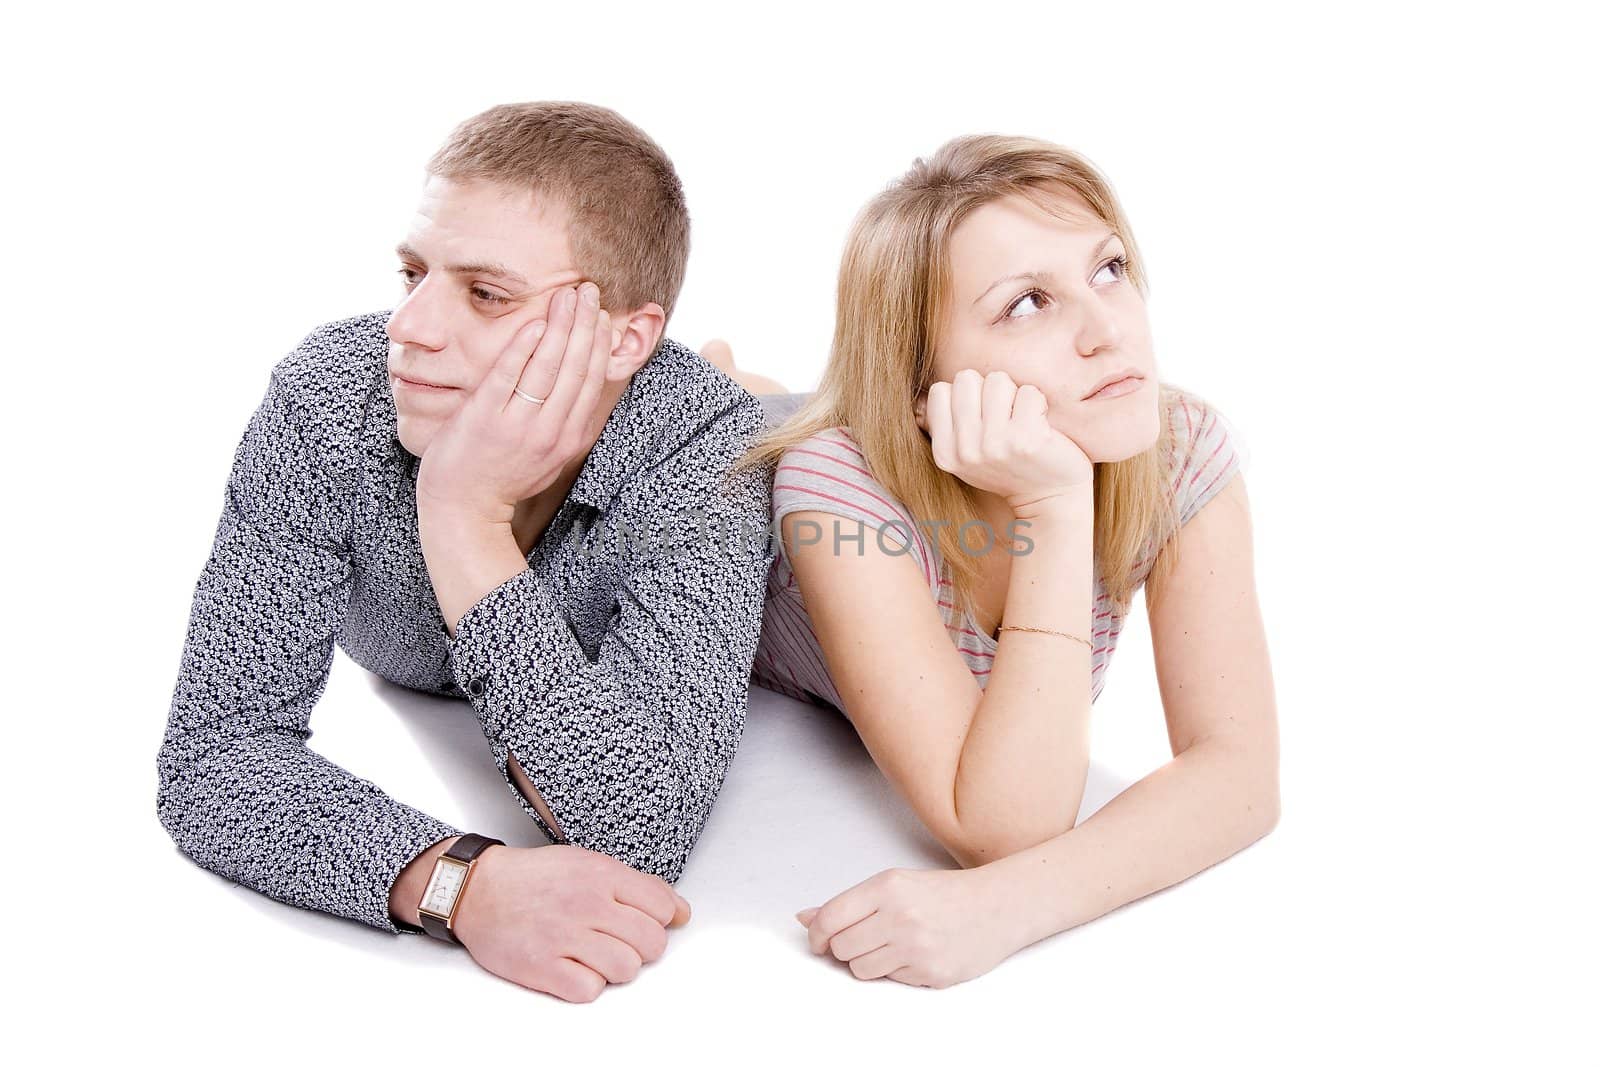 The man and the woman lie on floor on white background